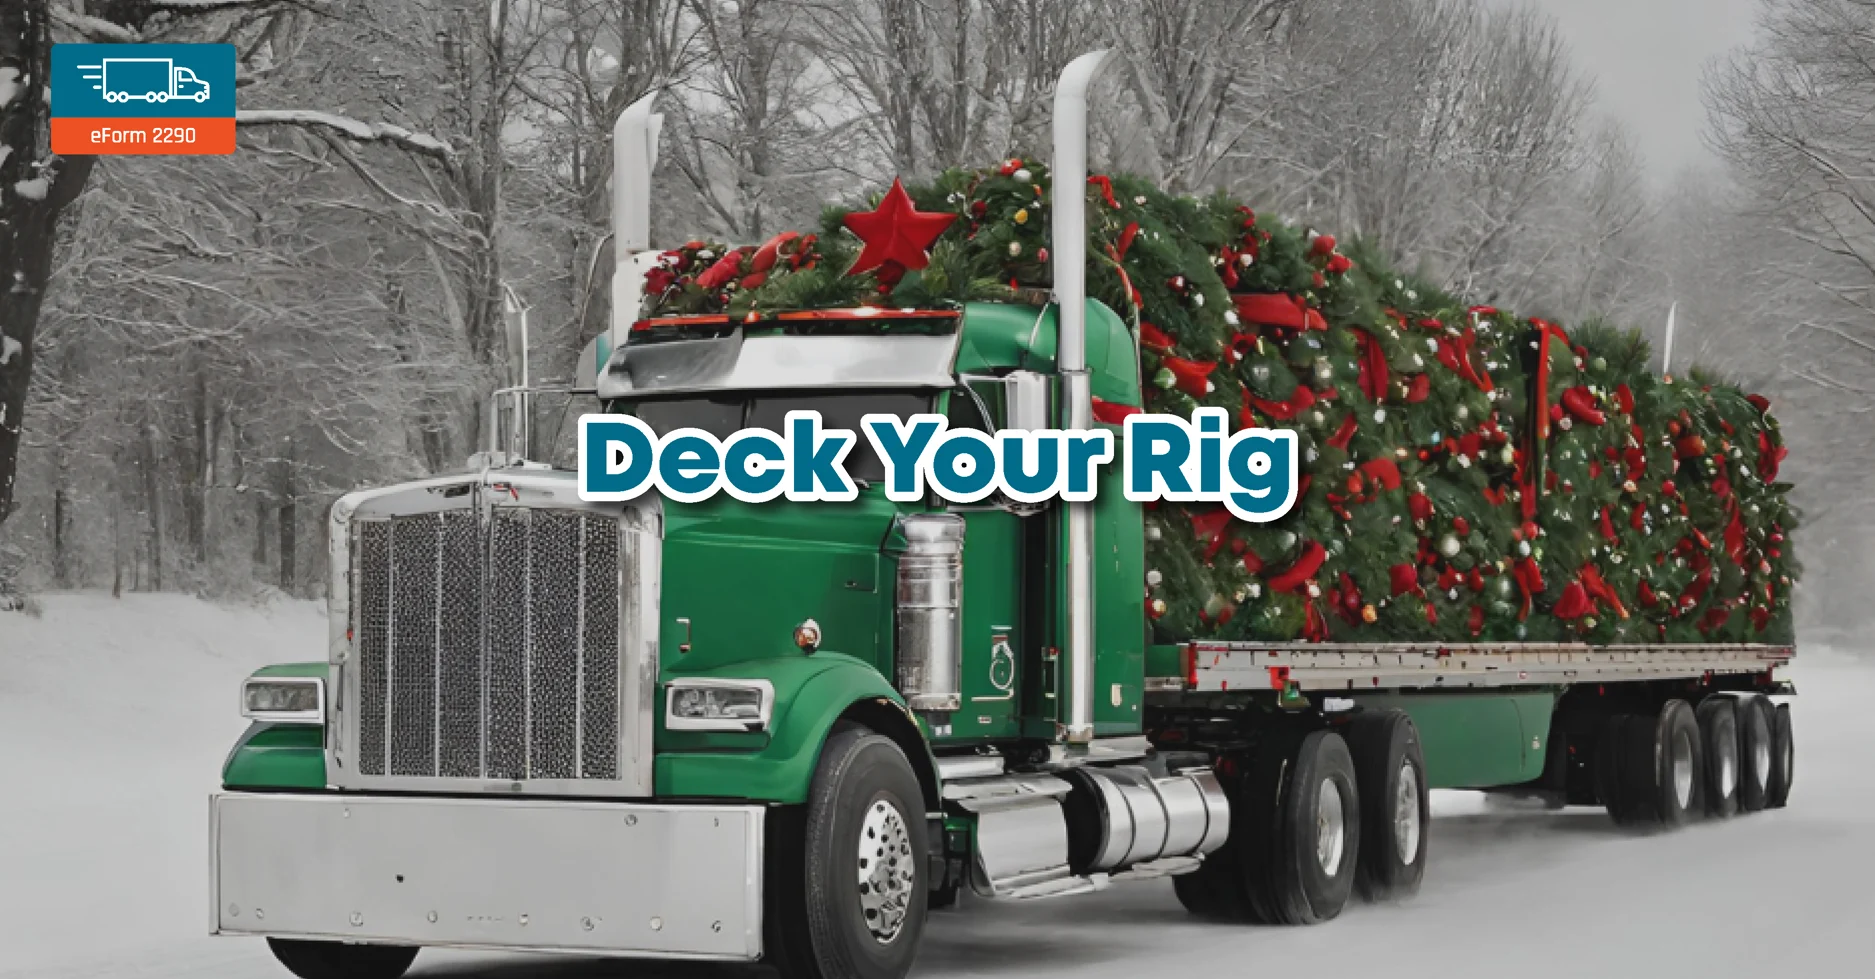 Deck-your-rig